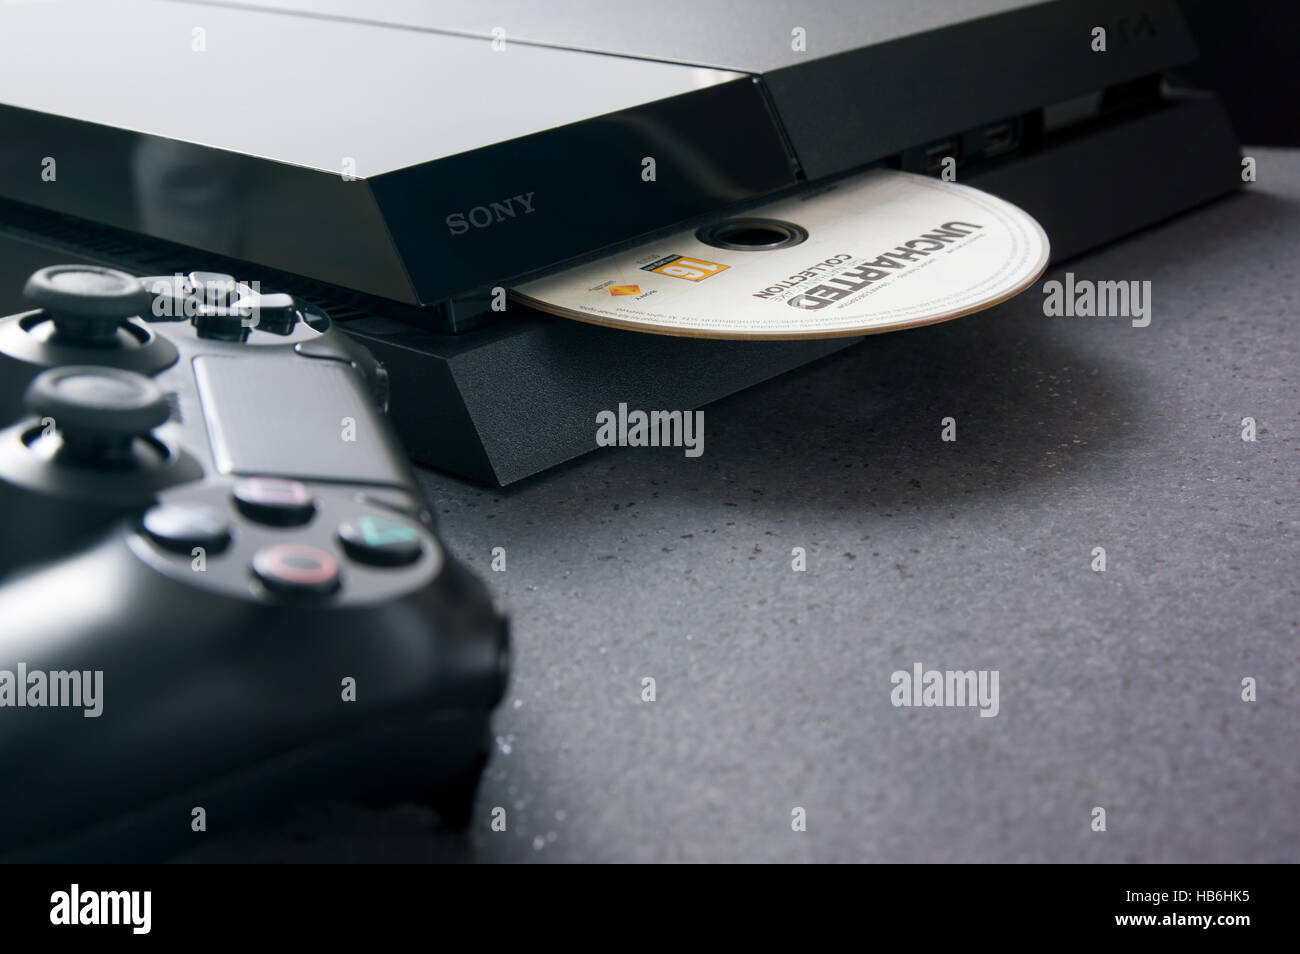 WROCLAW, POLAND -  NOVEMBER 30th, 2016: Playstation 4 on desk. The PlayStation 4 is a home video game console developed by Sony Computer Entertainment Stock Photo